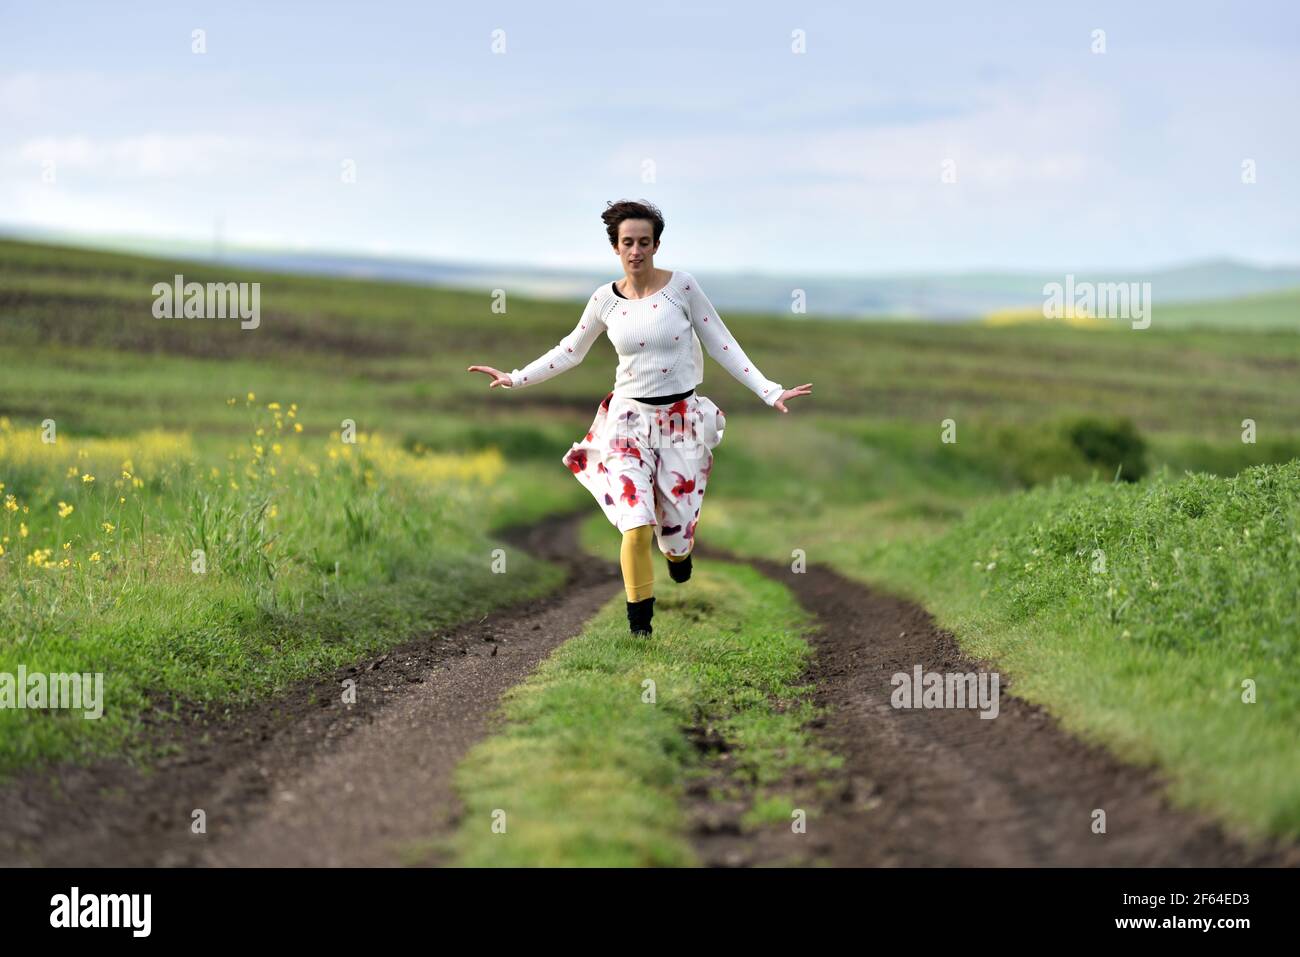 Joyful younf woman in skirt running in canola field in the spring Stock Photo